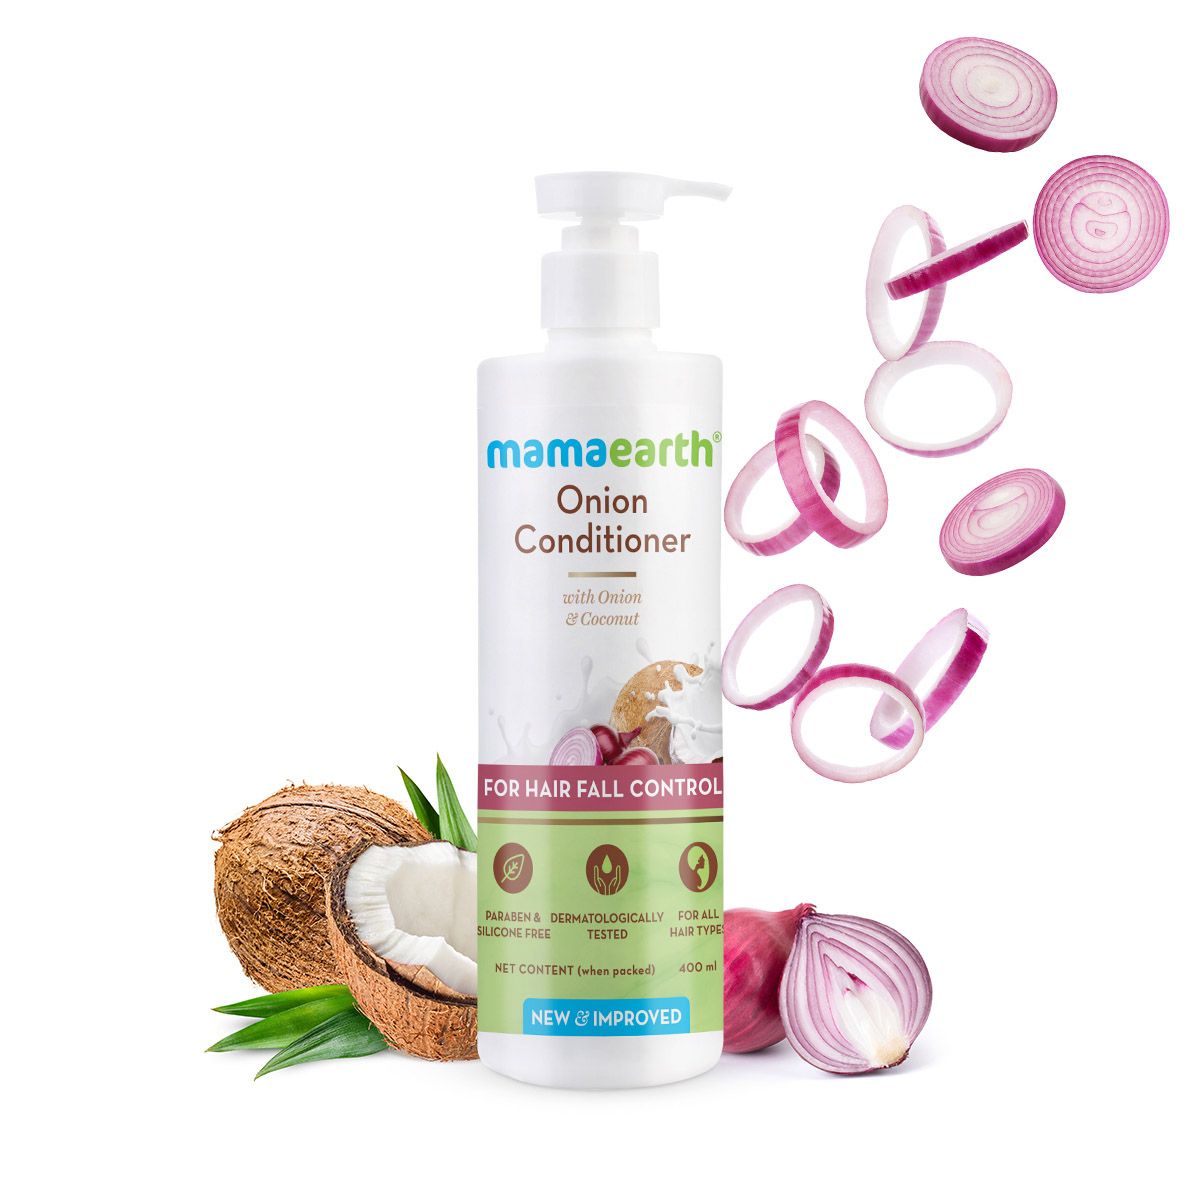 Mamaearth Onion Conditioner Review - RJ PRO REVIEWS